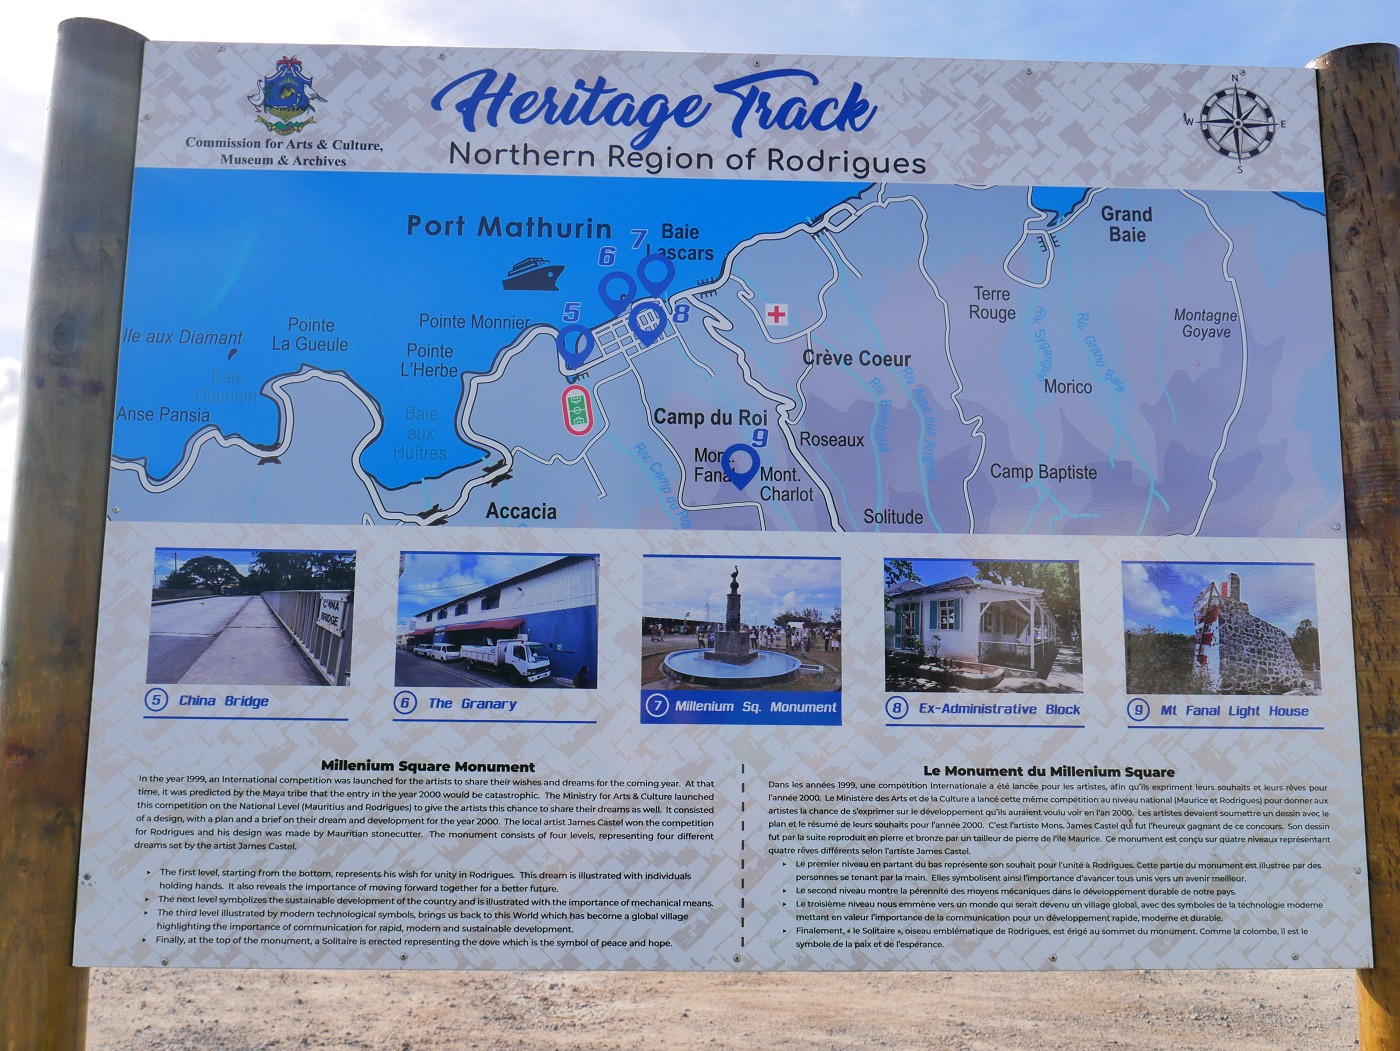 Heritage track base map tourism office Rodrigues